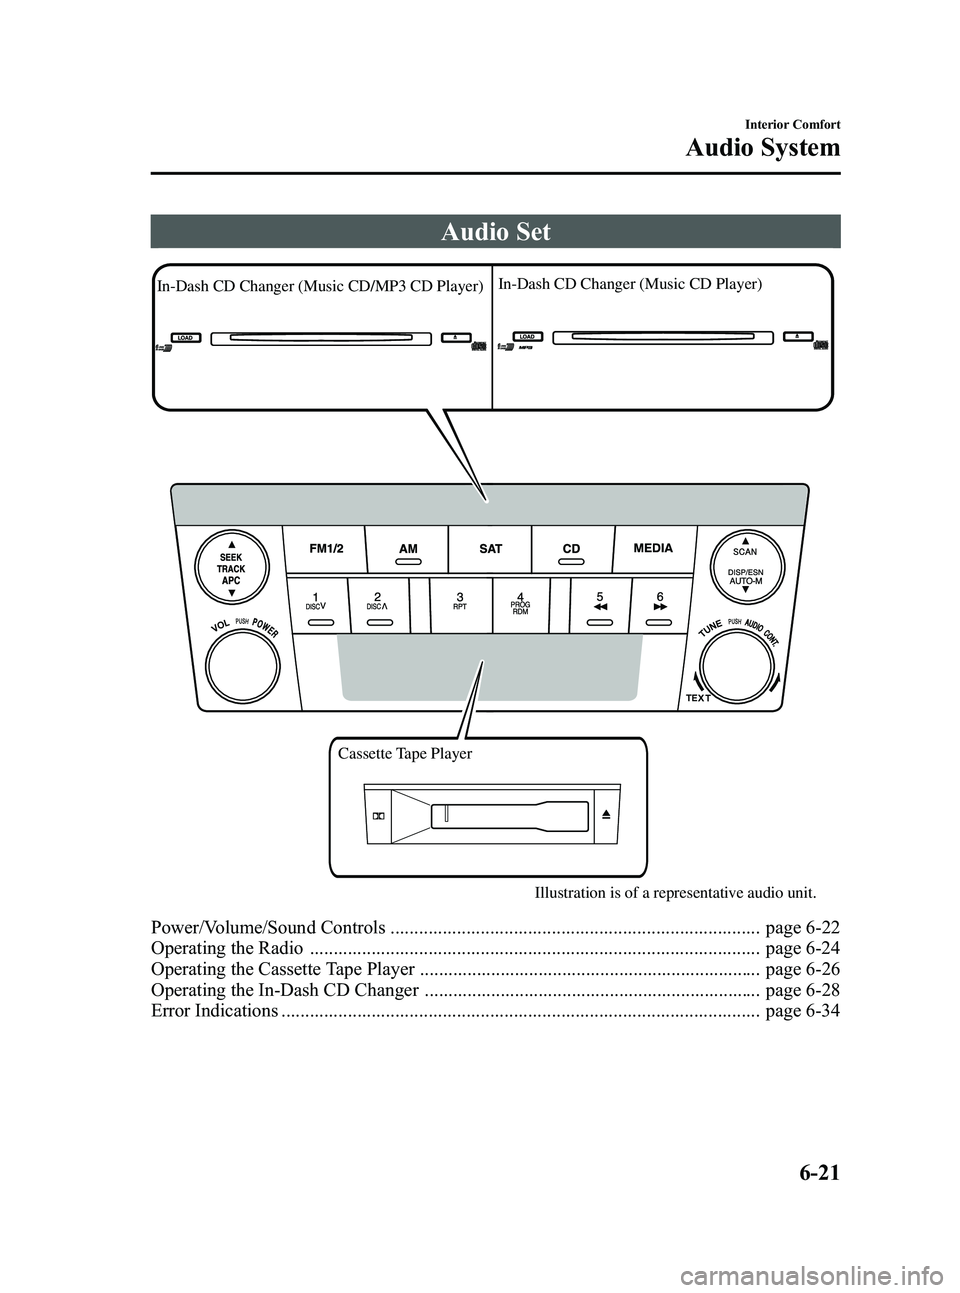 MAZDA MODEL SPEED 6 2006  Owners Manual Black plate (201,1)
Audio Set
Illustration is of a representative audio unit.
Cassette Tape Player
In-Dash CD Changer (Music CD/MP3 CD Player)
In-Dash CD Changer (Music CD Player)
Power/Volume/Sound C